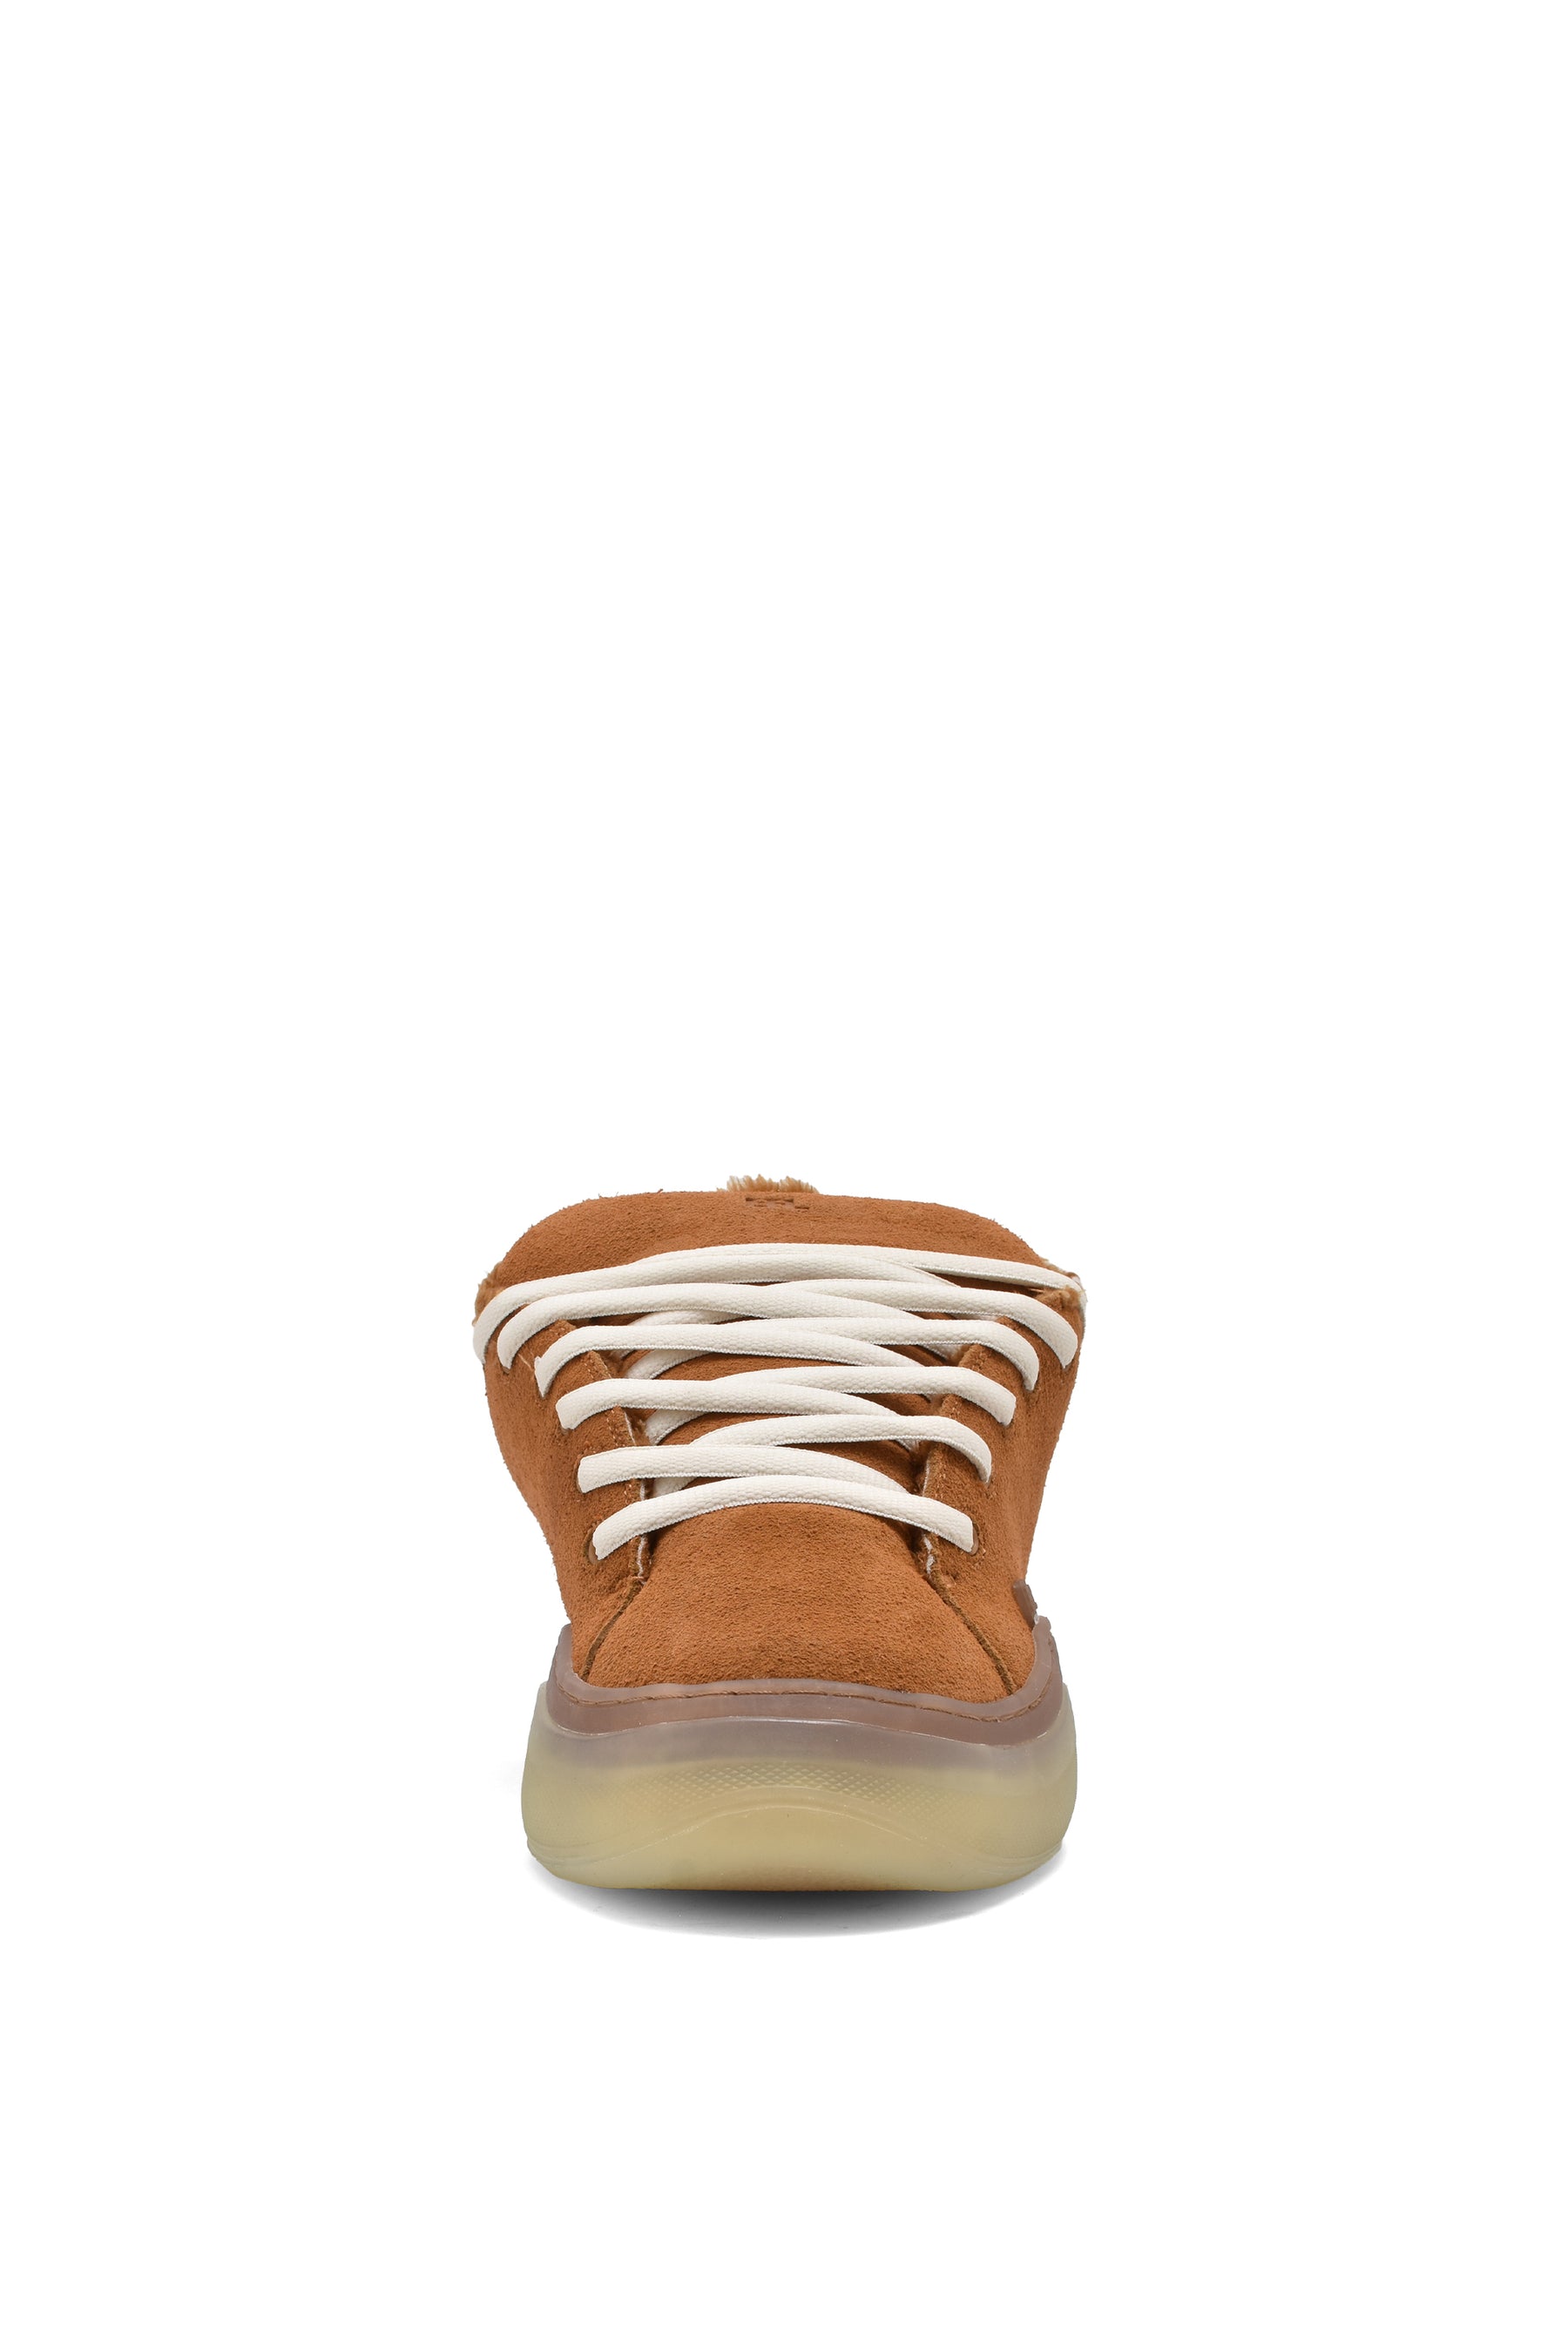 SUEDE SKATE SNEAKER LEATHER / BRW